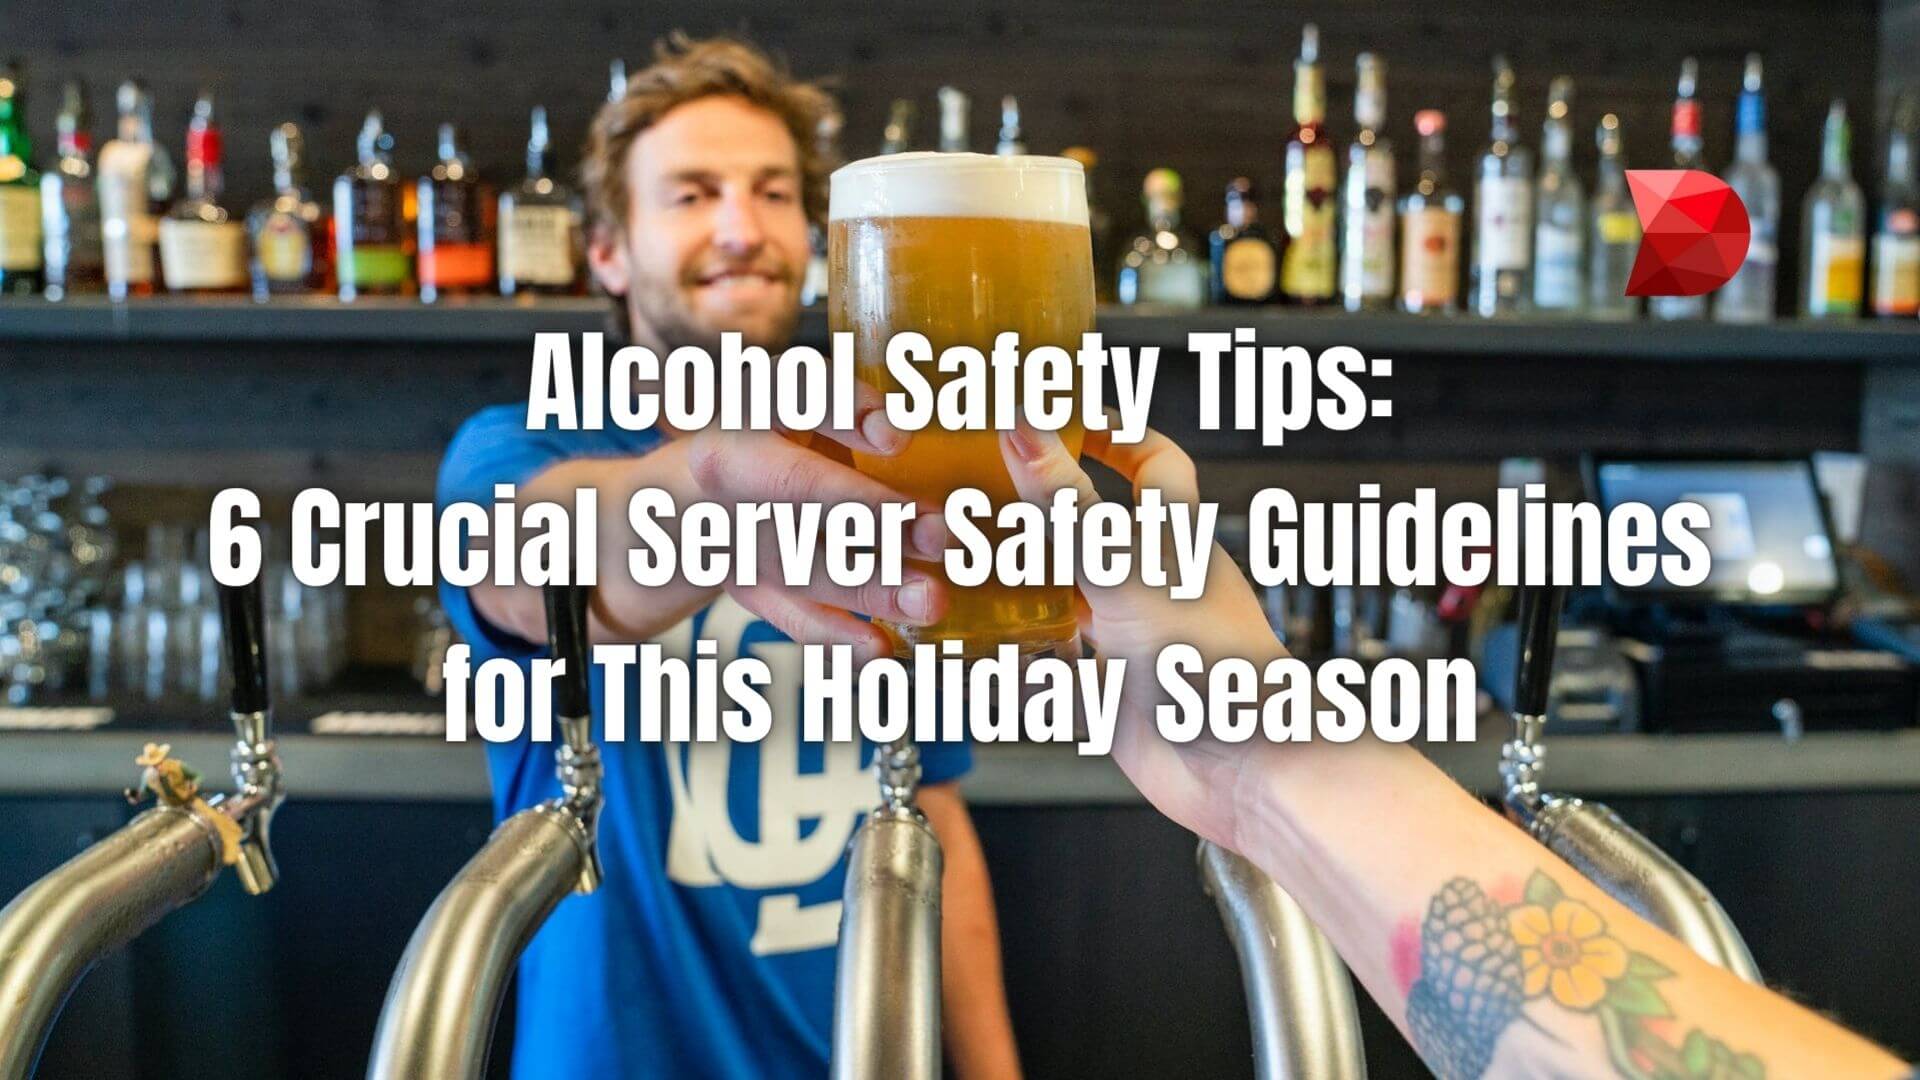 Discover essential server safety tips for alcohol handling. Learn 6 crucial guidelines for a safer serving experience. Stay informed!